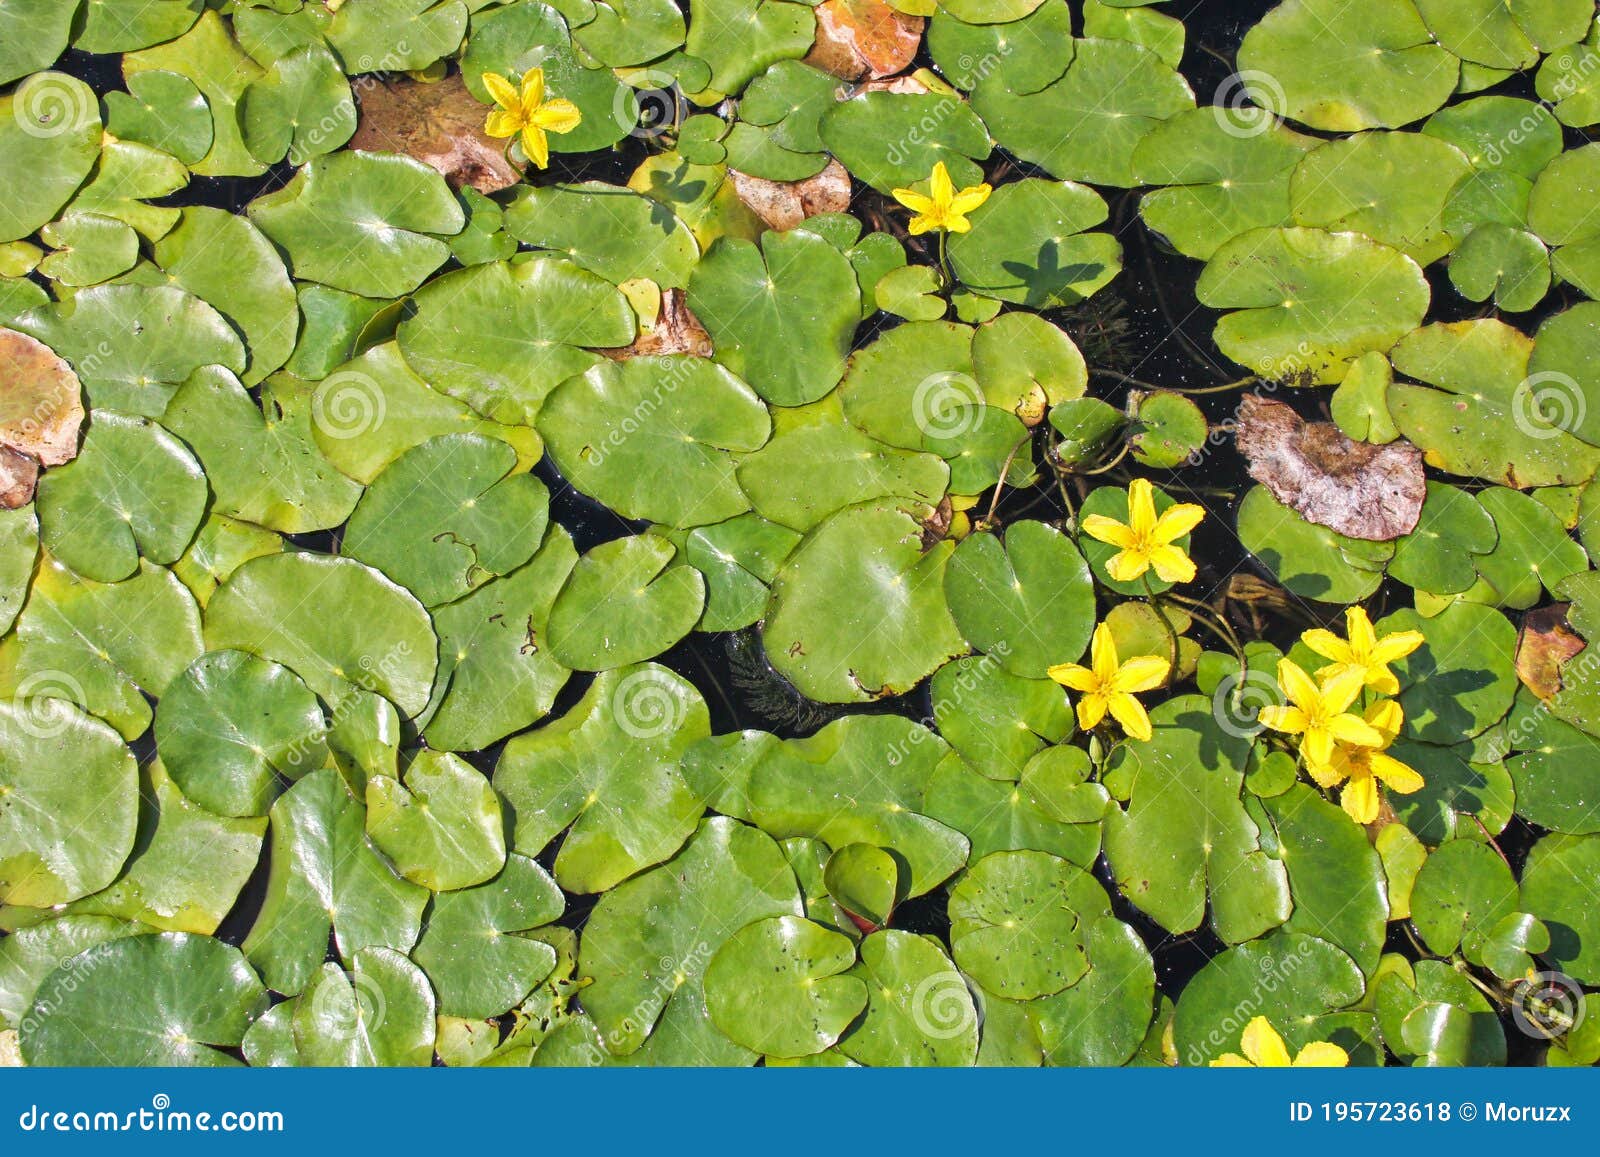 Water Lily Flowers and Leaves Stock Photo - Image of flora, aquatic ...